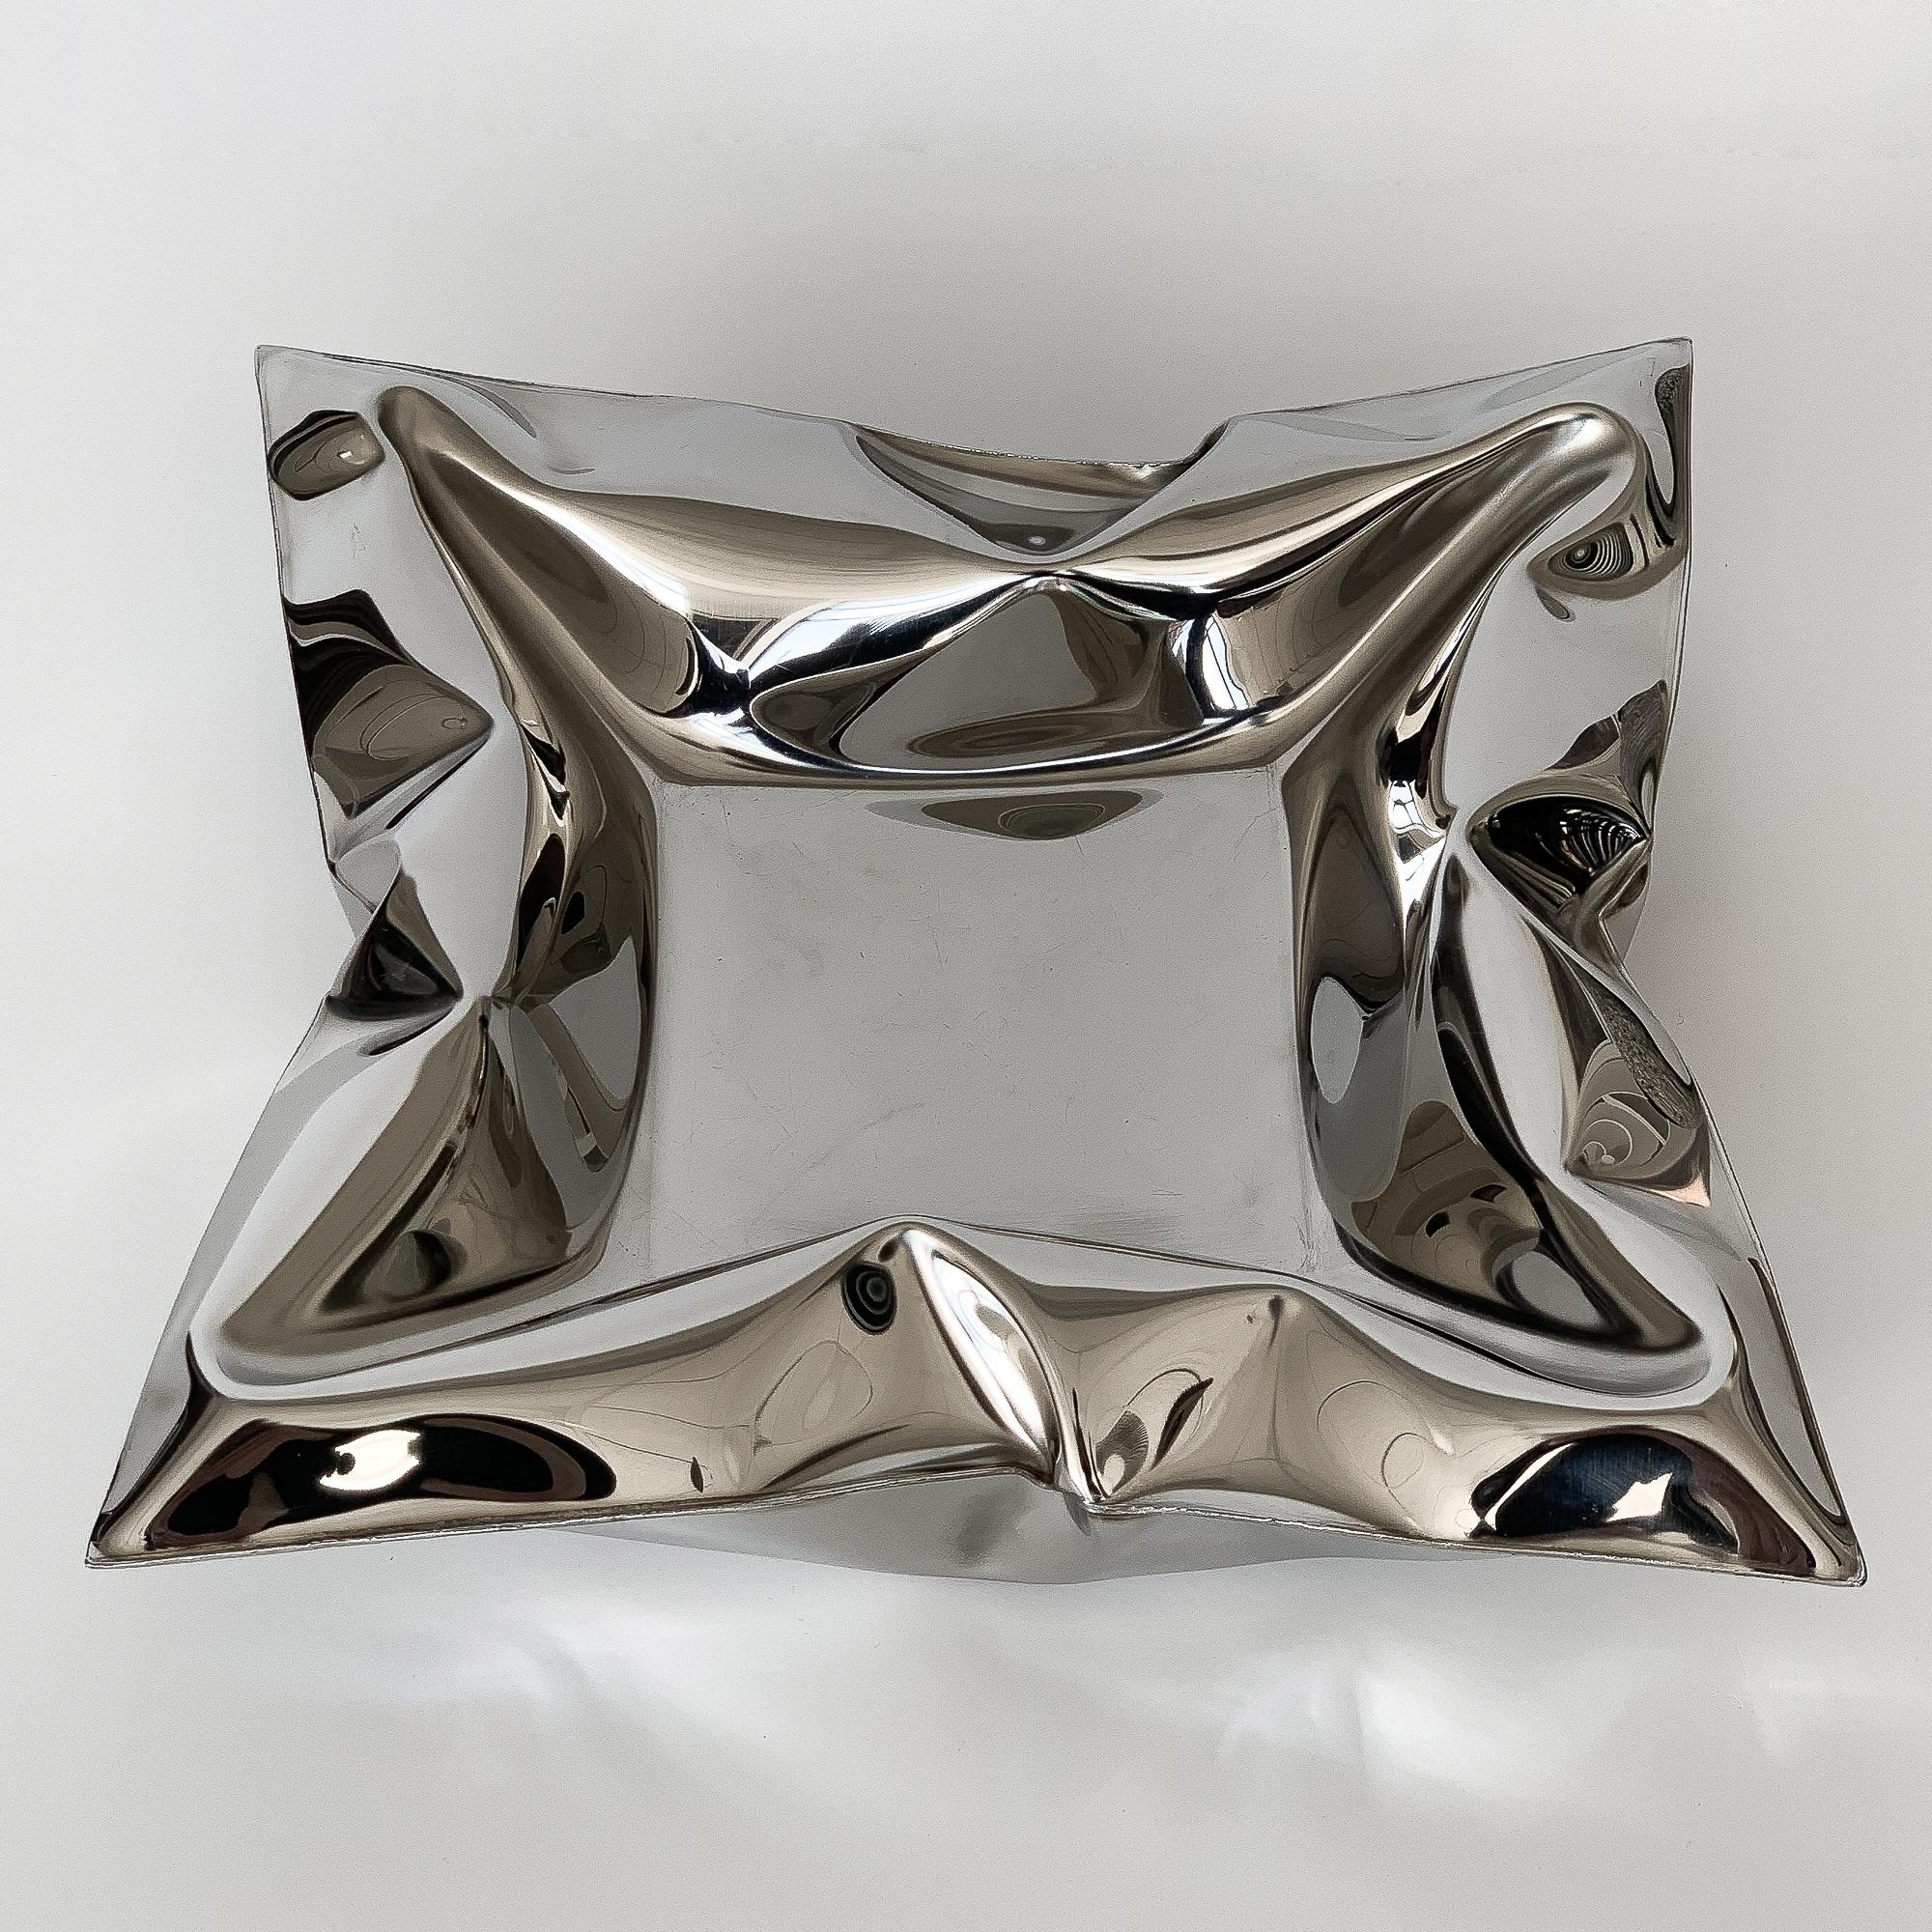 Hand-Crafted Stephen Newby Inflated Stainless Steel Bowl